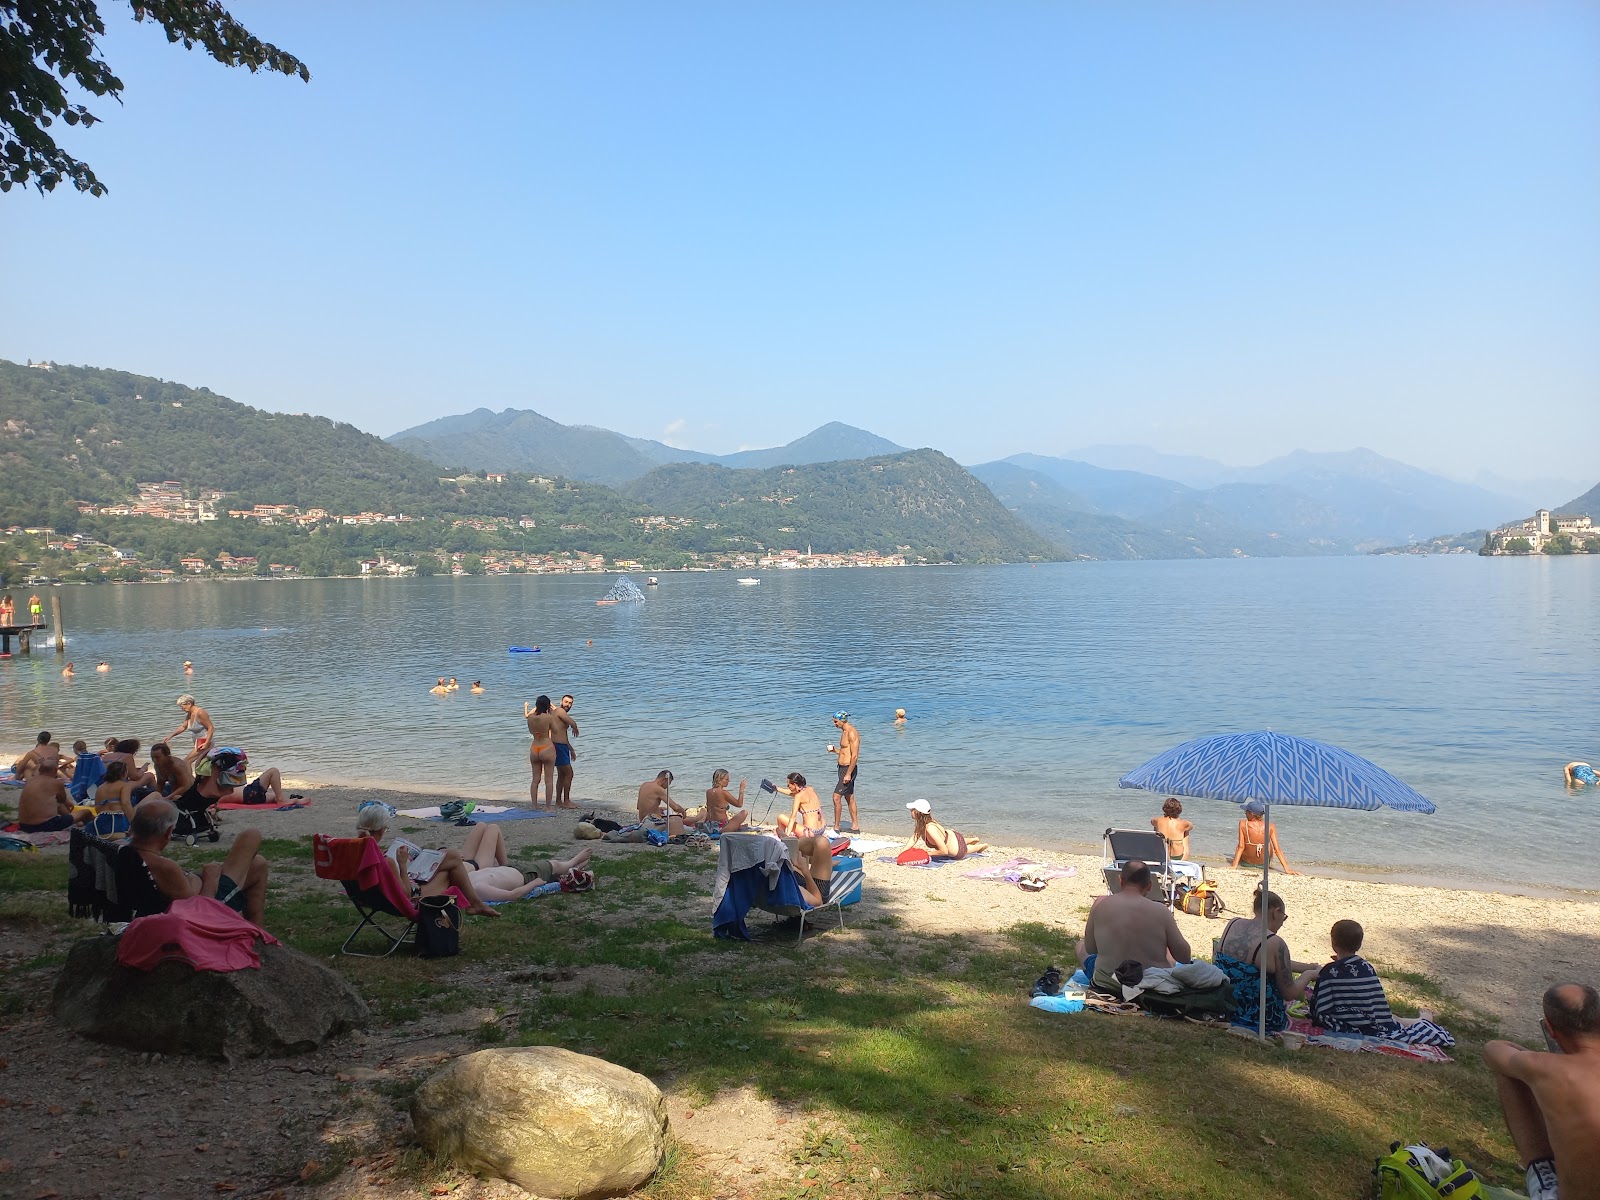 Photo of Spiaggia Prarolo - popular place among relax connoisseurs